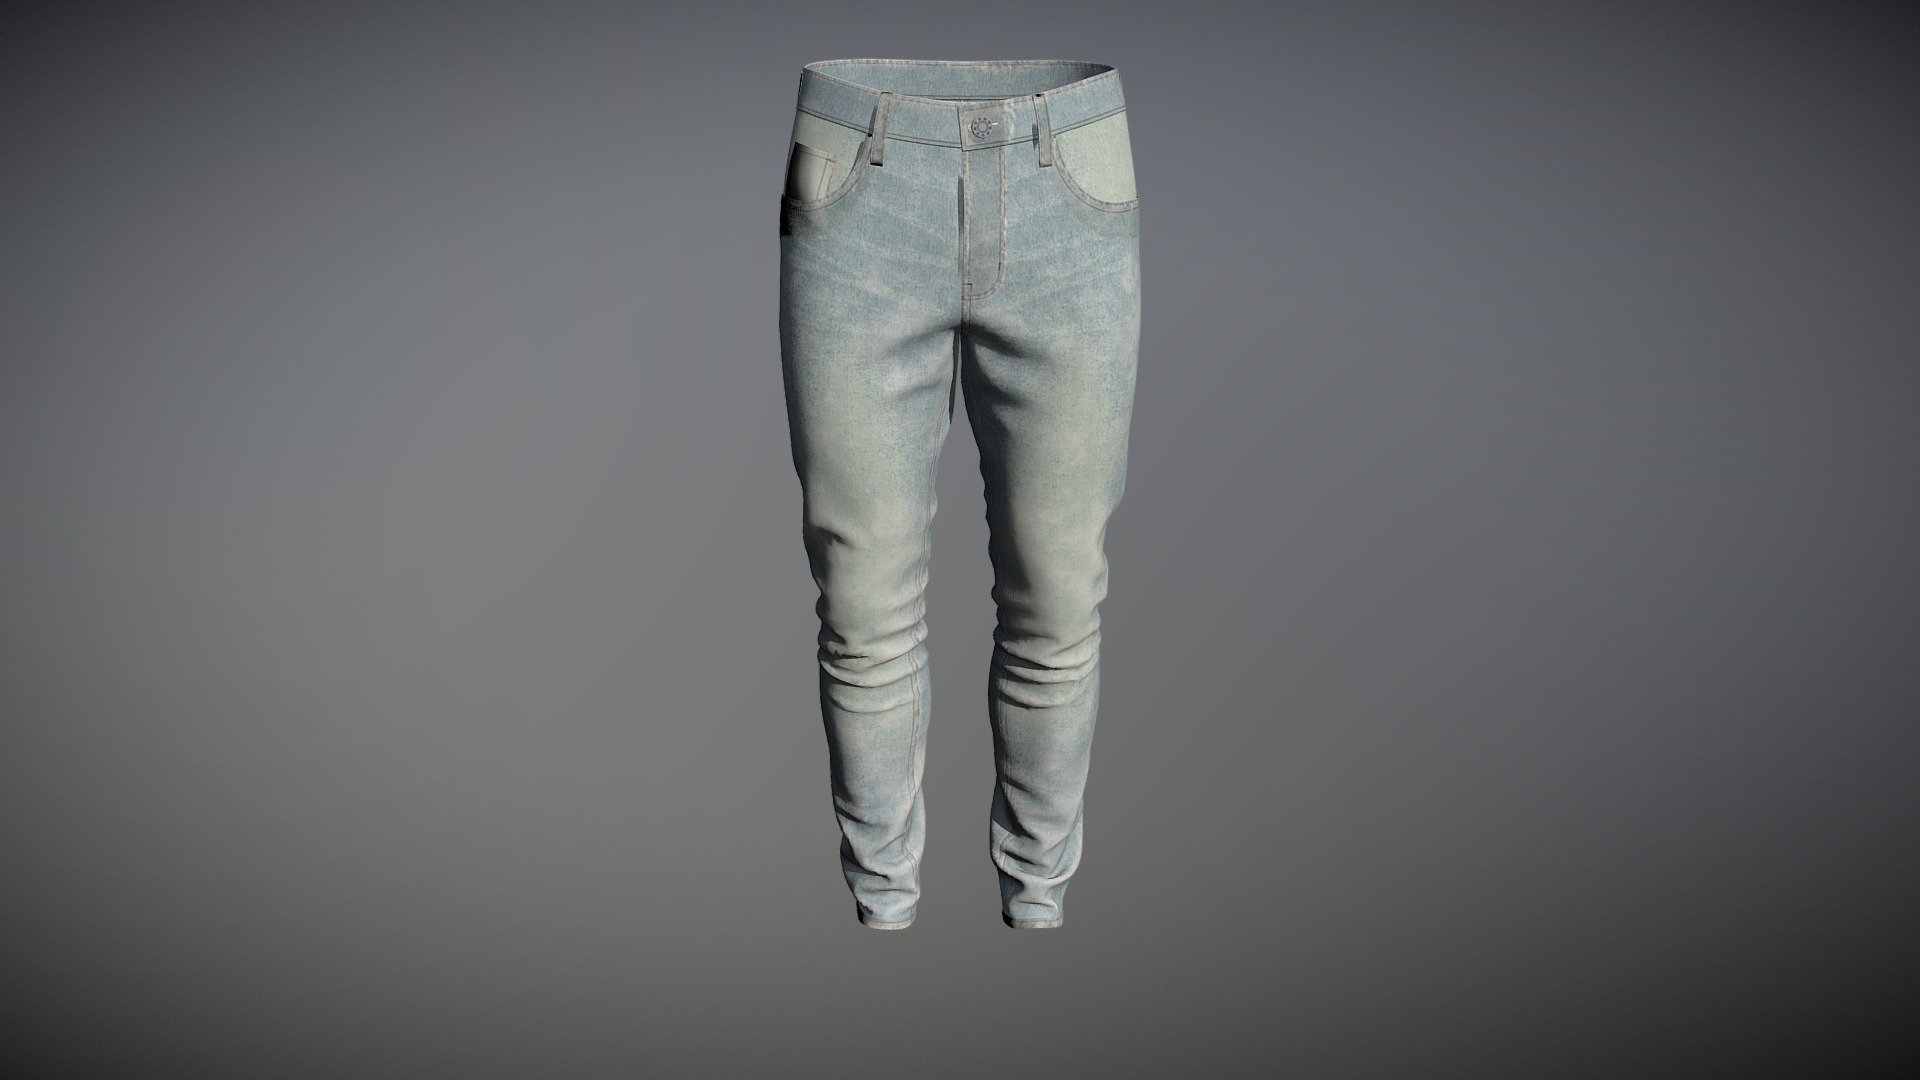 Cloth Title = Men's Casual Denim Pant 

Model = CC4 Kevin 

Pose =  Stand Pose M 

SKU = DG100151 

Product Type = Denim  

Cloth Length = Regular  

Body Fit = Slim Fit 

Occasion = Outerwear 

Waist Rise = Mid Rise 


Our Services:

3D Apparel Design.

OBJ,FBX,GLTF Making with High/Low Poly.

Fabric Digitalization.

Mockup making.

3D Teck Pack.

Pattern Making.

2D Illustration.

Cloth Animation and 360 Spin Video.


Contact us:- 

Email: info@digitalfashionwear.com 

Website: https://digitalfashionwear.com 


We designed all the types of cloth specially focused on product visualization, e-commerce, fitting, and production. 

We will design: 

T-shirts 

Polo shirts 

Hoodies 

Sweatshirt 

Jackets 

Shirts 

TankTops 

Trousers 

Bras 

Underwear 

Blazer 

Aprons 

Leggings 

and All Fashion items. 





Our goal is to make sure what we provide you, meets your demand 3d model